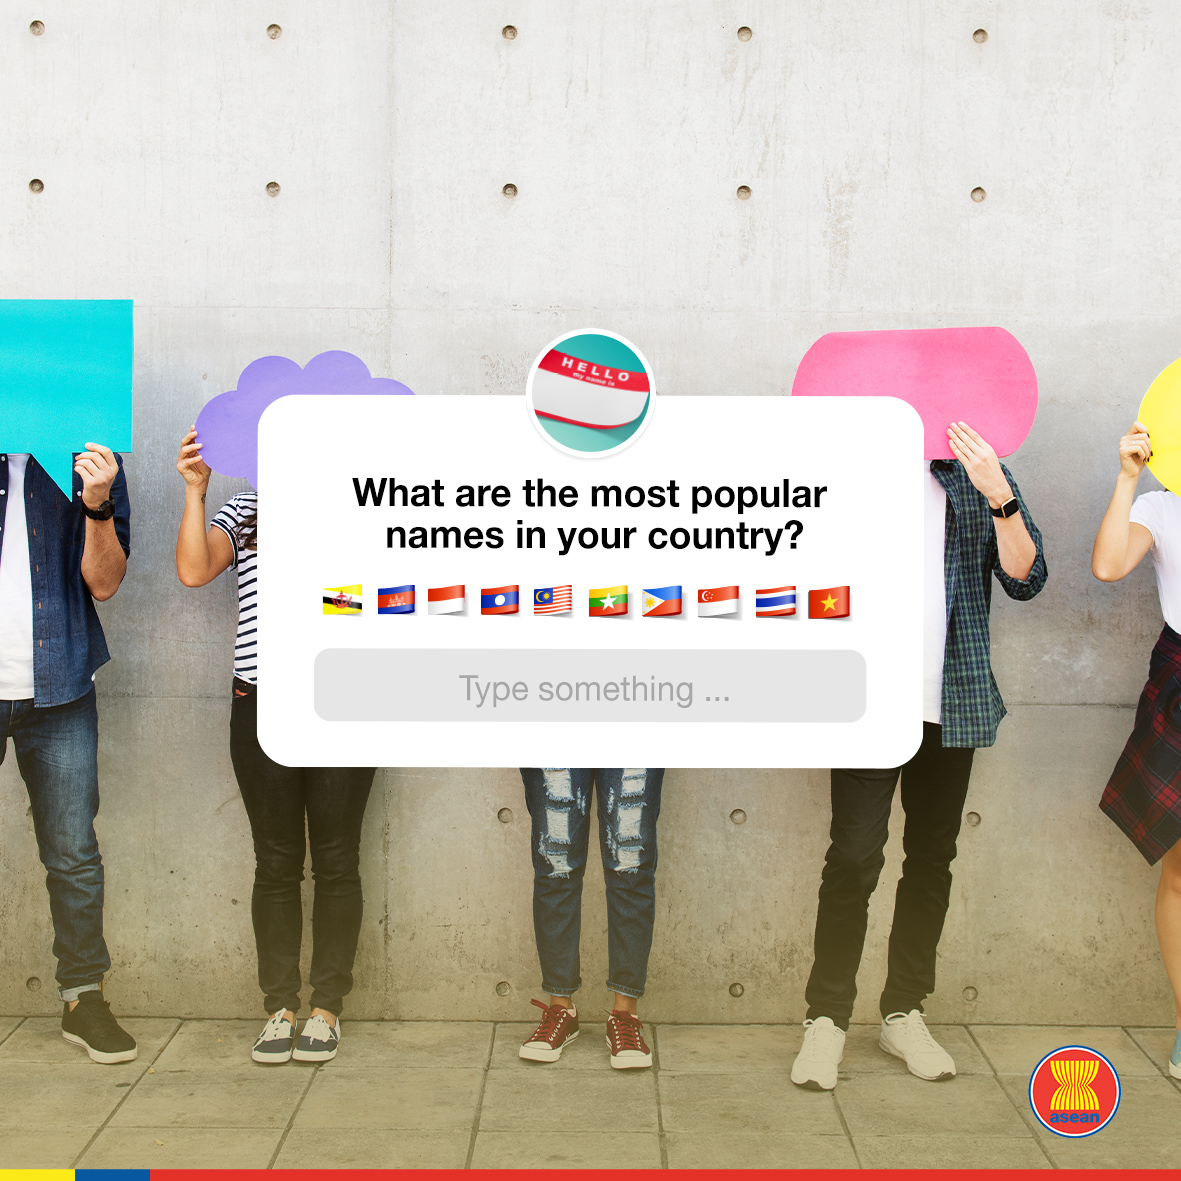 In the ASEAN community, a person’s name is considered sacred as it reveals our roots including our culture and nationality. 👨👩

Put your name and nationality in the comment section below and see how many ASEAN friends shares your name! #ASEANCulture